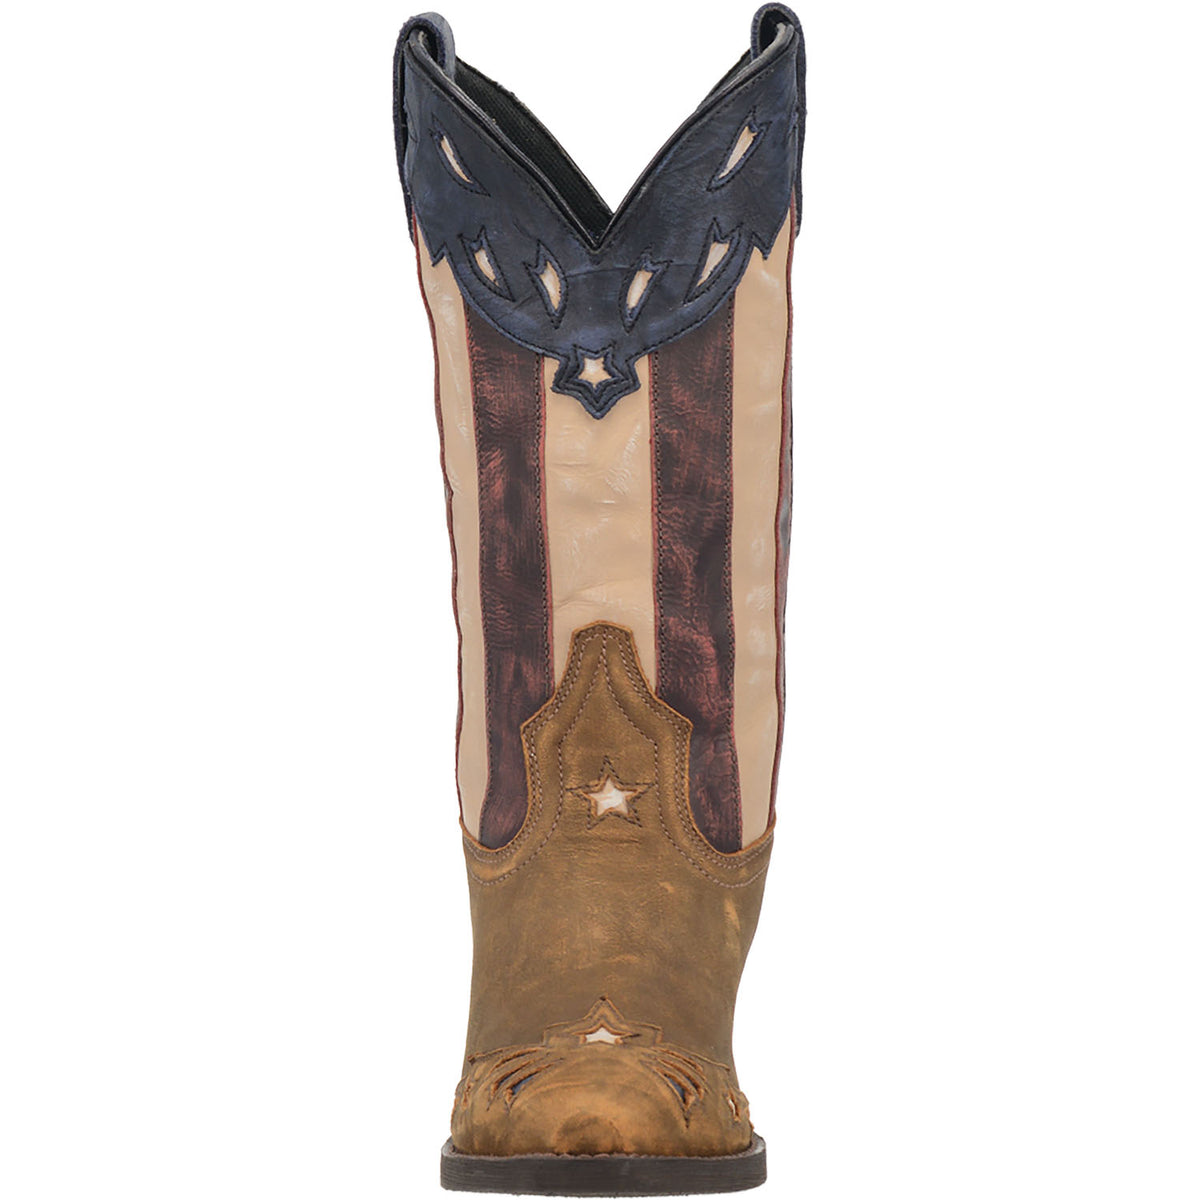 KEYES STARS AND STRIPES LEATHER BOOT Image